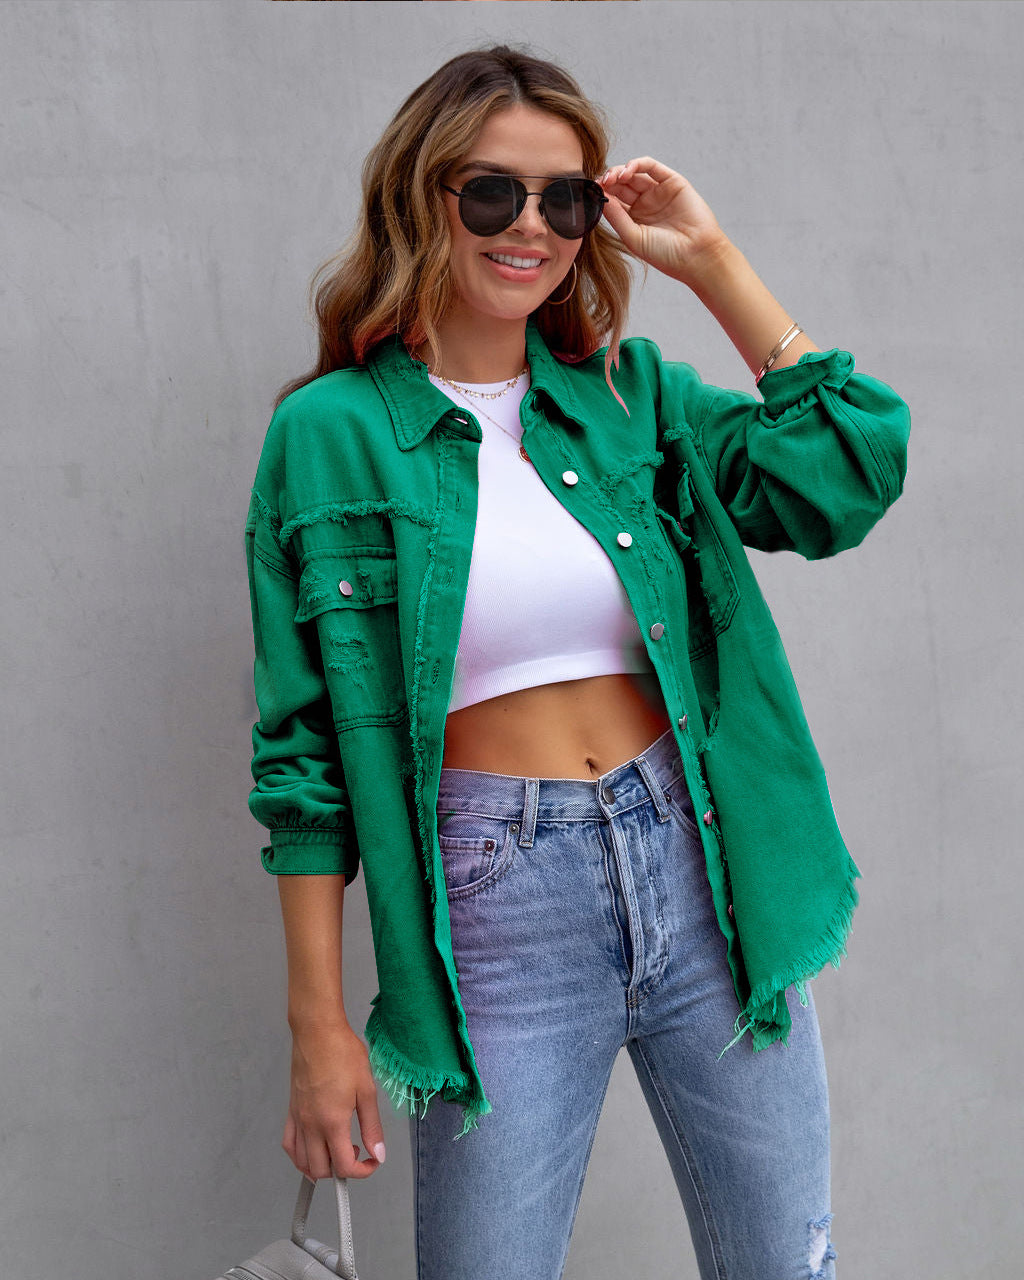 Elevate Your Style with the Ripped Shirt Jacket